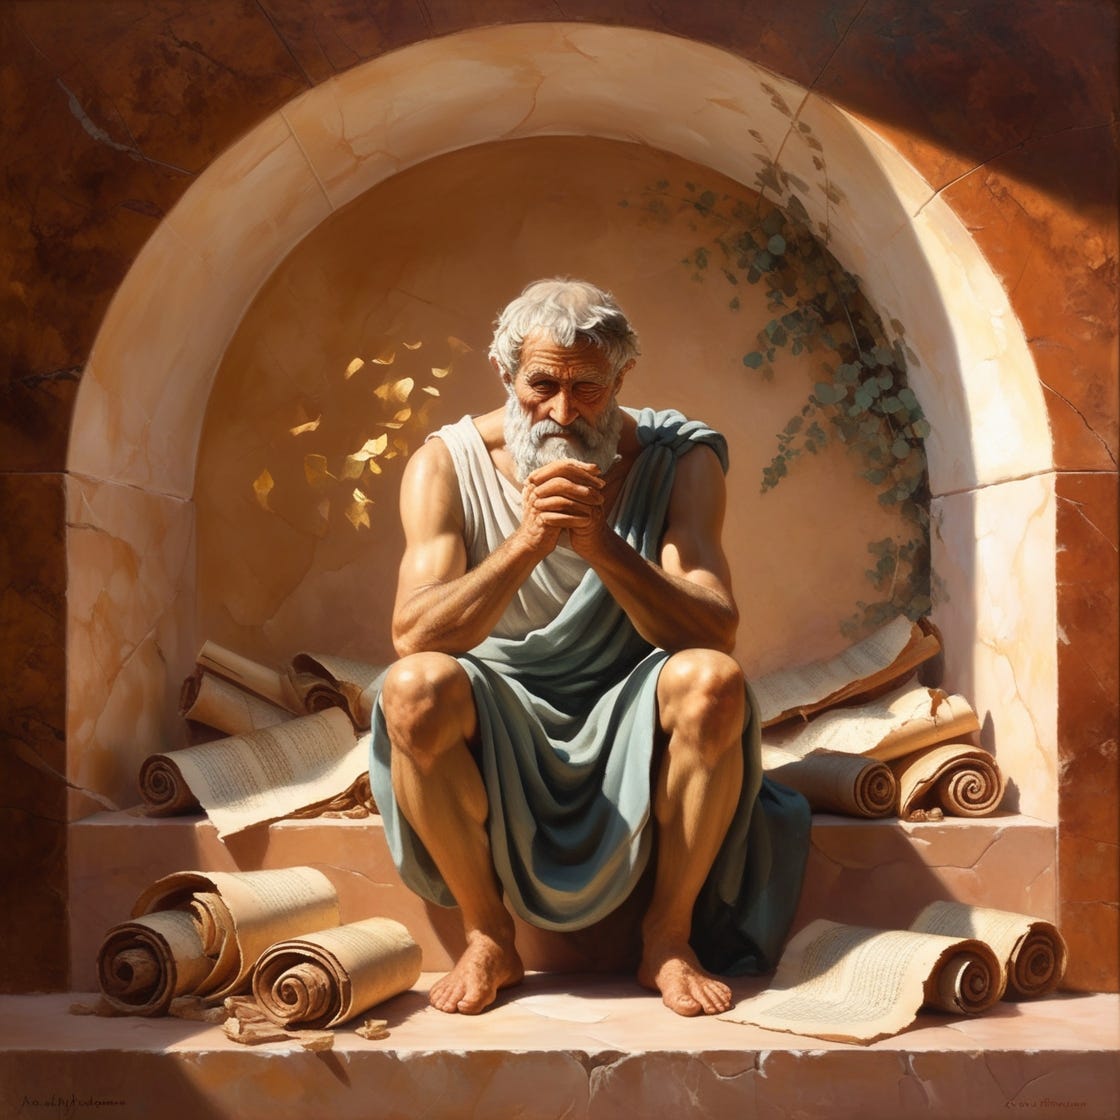 A wise man from ancient Greece, rendered in soft, expressive oil paints, sits amidst a warm, honey-toned marble alcove, surrounded by crumbling scrolls and parchments, his wrinkled hands clasped together in contemplation, his eyes cast downward, lost in thought, as if the weight of the world rests on his shoulders, with flickers of golden sunlight dancing across his aged face, set against a rich, burnished sienna background, evoking a sense of antiquity and mysticism, with hints of sage green and earthy brown tones, imbuing the scene with a sense of wisdom and ancient knowledge.